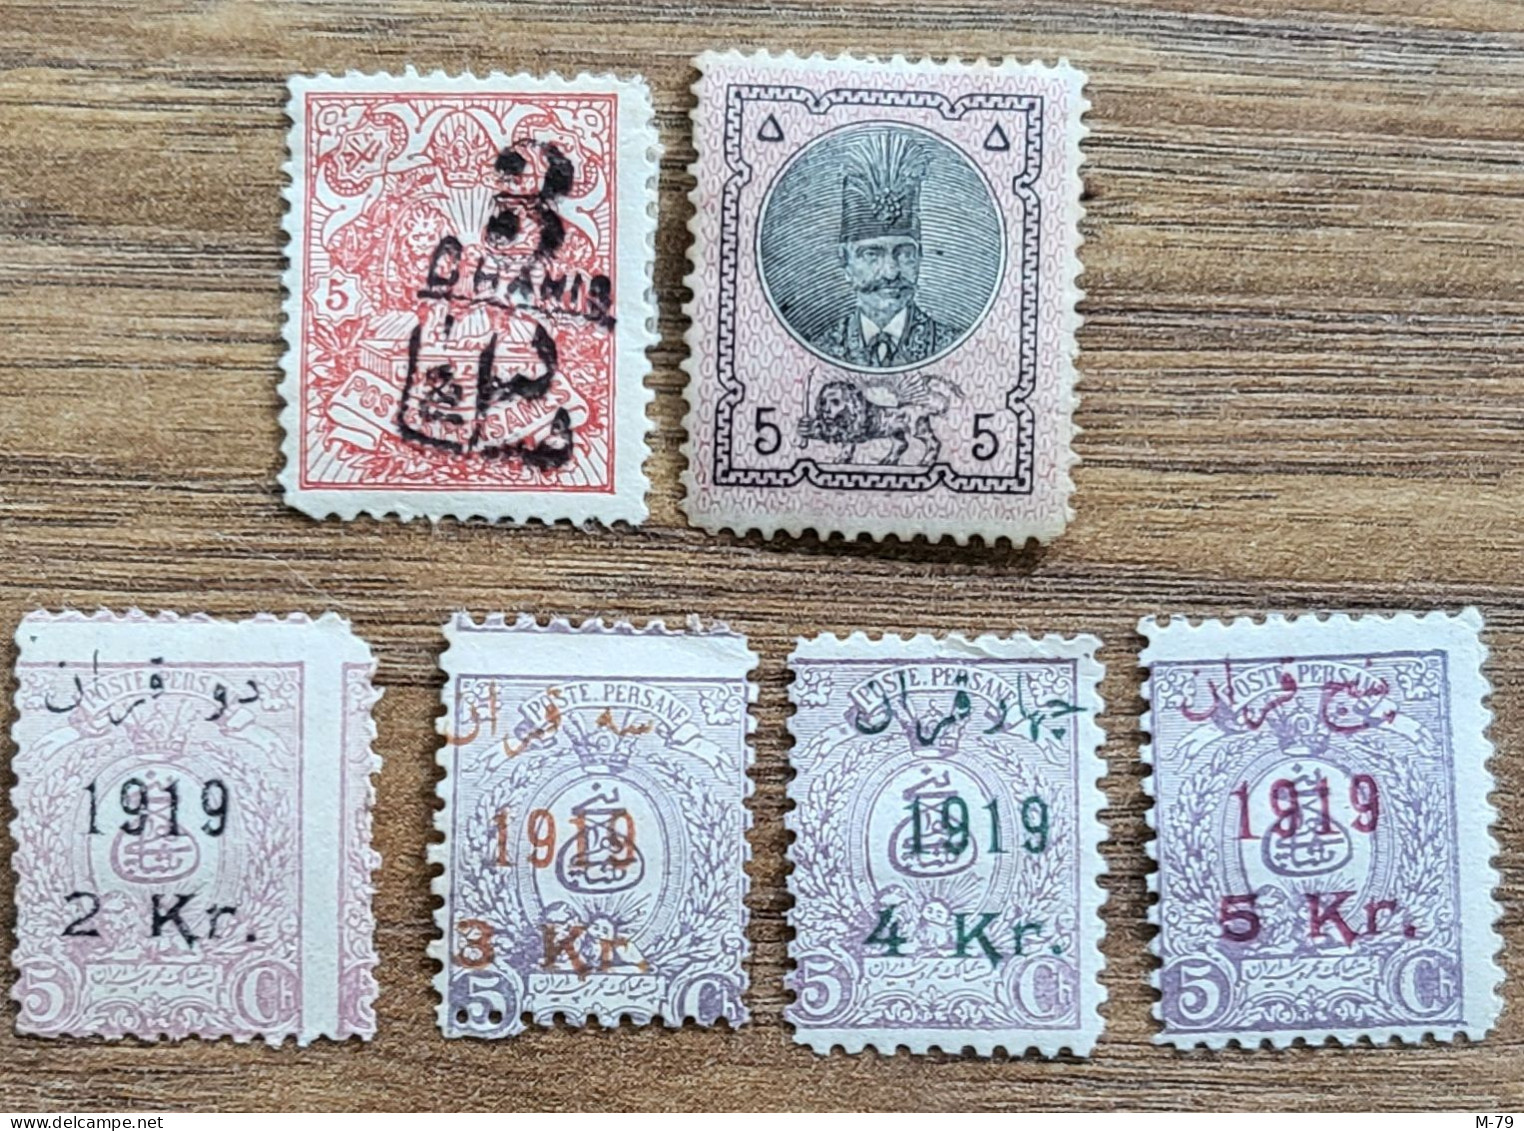 Iran/Persia - Qajar Mix stamps Collection - Singles - Blocks - Surcharge - MNH - MH - OG -  a few No GUM